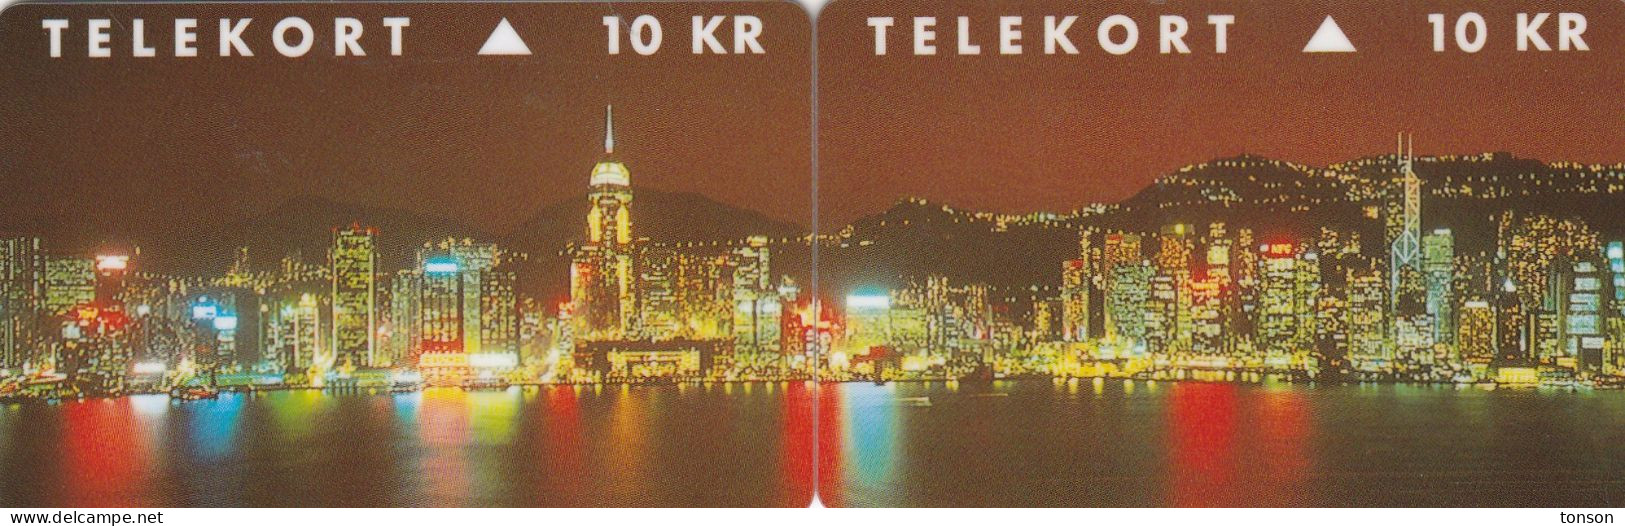 Denmark, KP 161 And TP 109, Hong Kong 95 Phonecard Exhibition, Puzzle, Mint Only 2.000 Issued, 2 Scans - Denmark